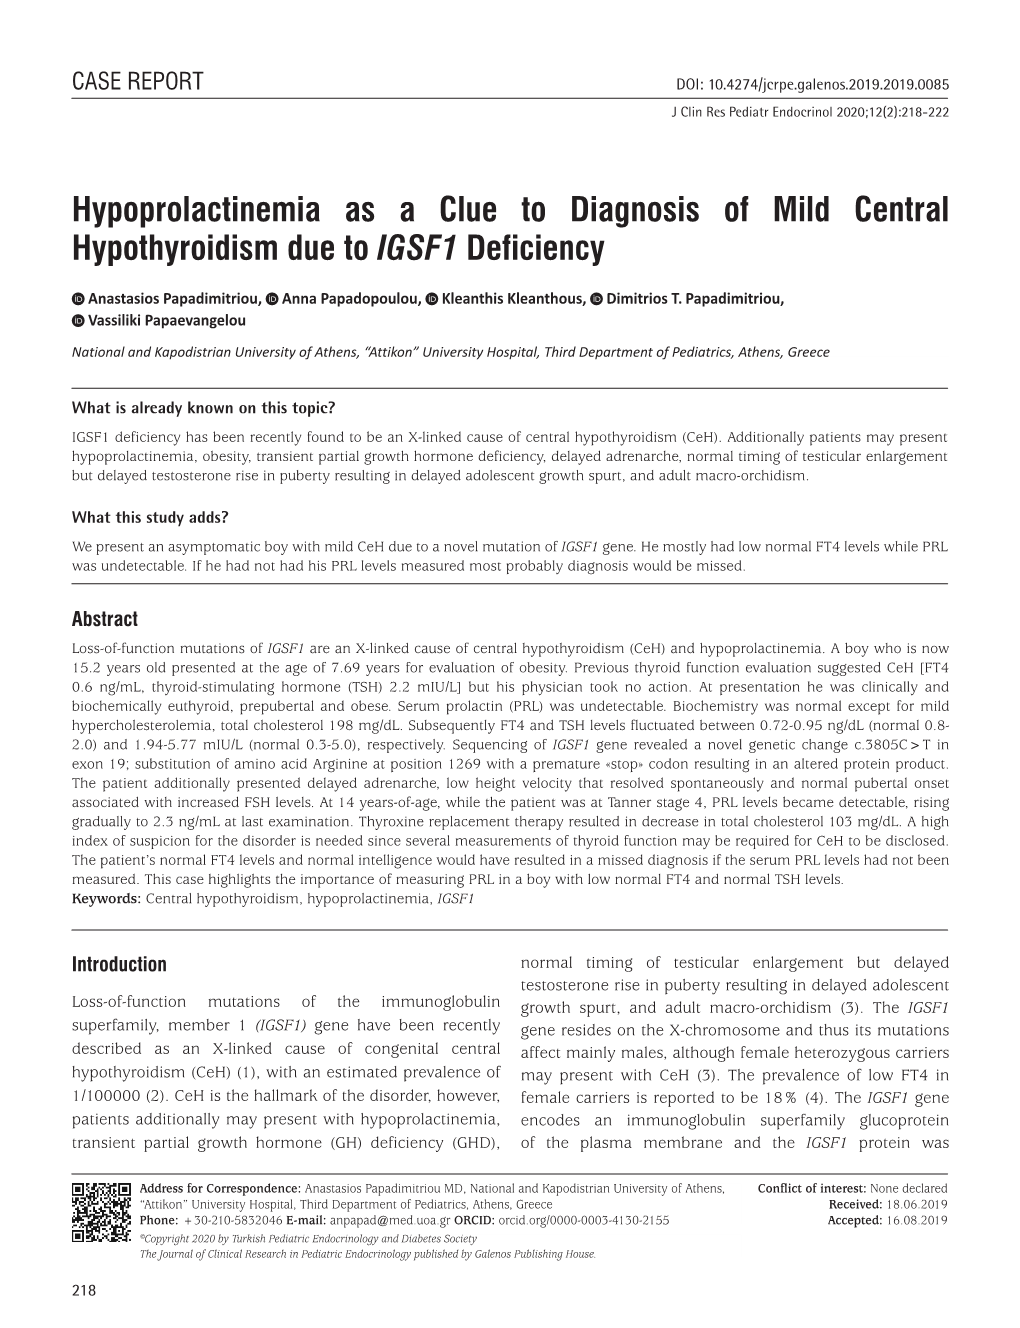 Hypoprolactinemia As a Clue to Diagnosis of Mild Central Hypothyroidism Due to IGSF1 Deficiency